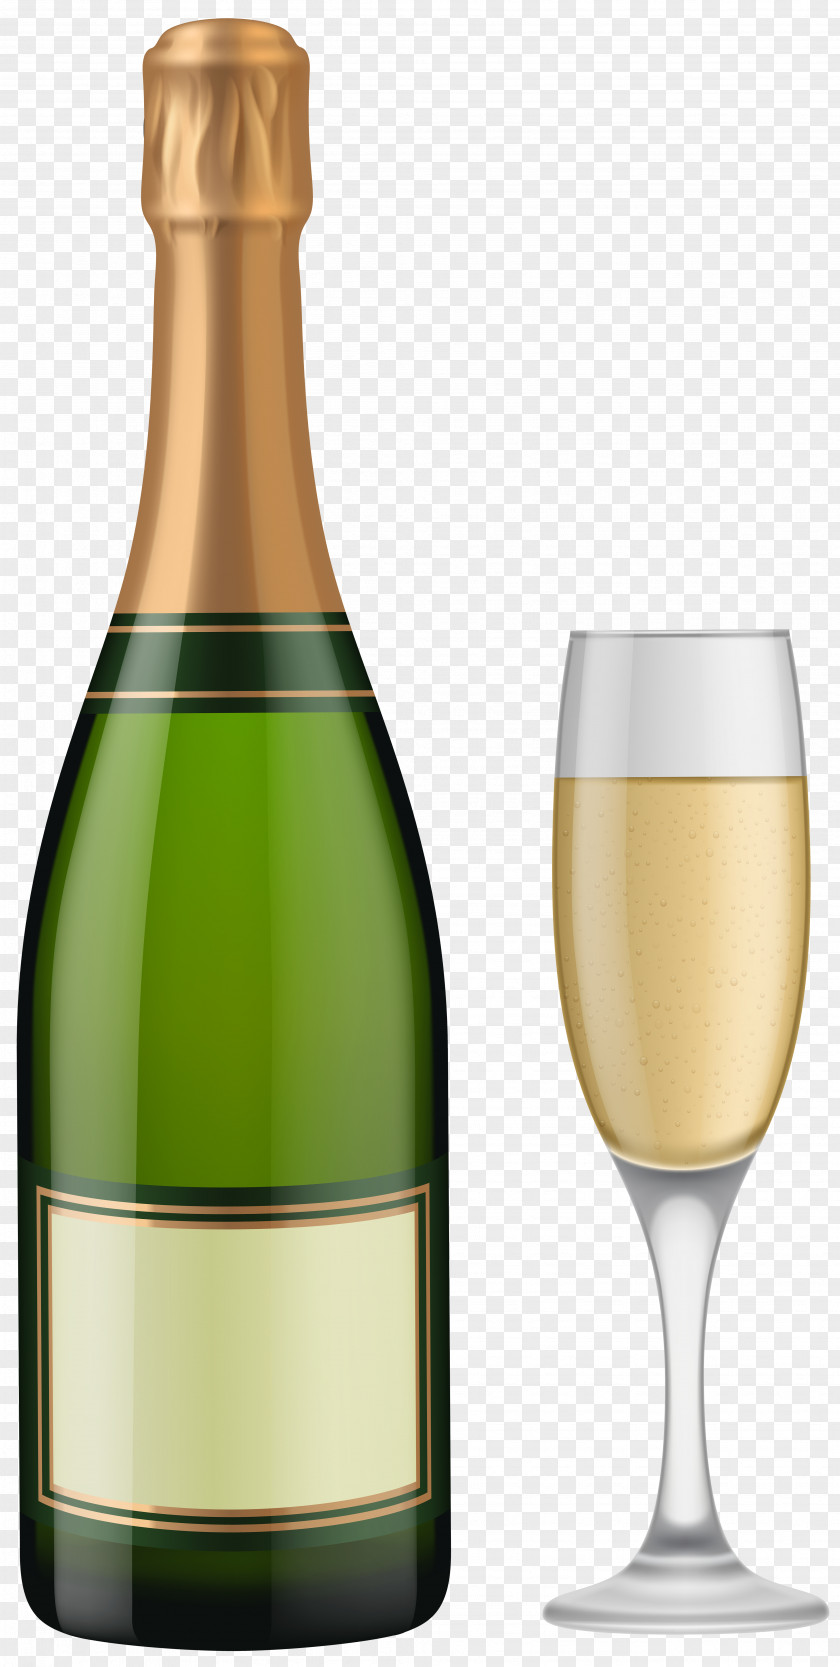 Champagne Bottle And Glass Clip Art Sparkling Wine PNG